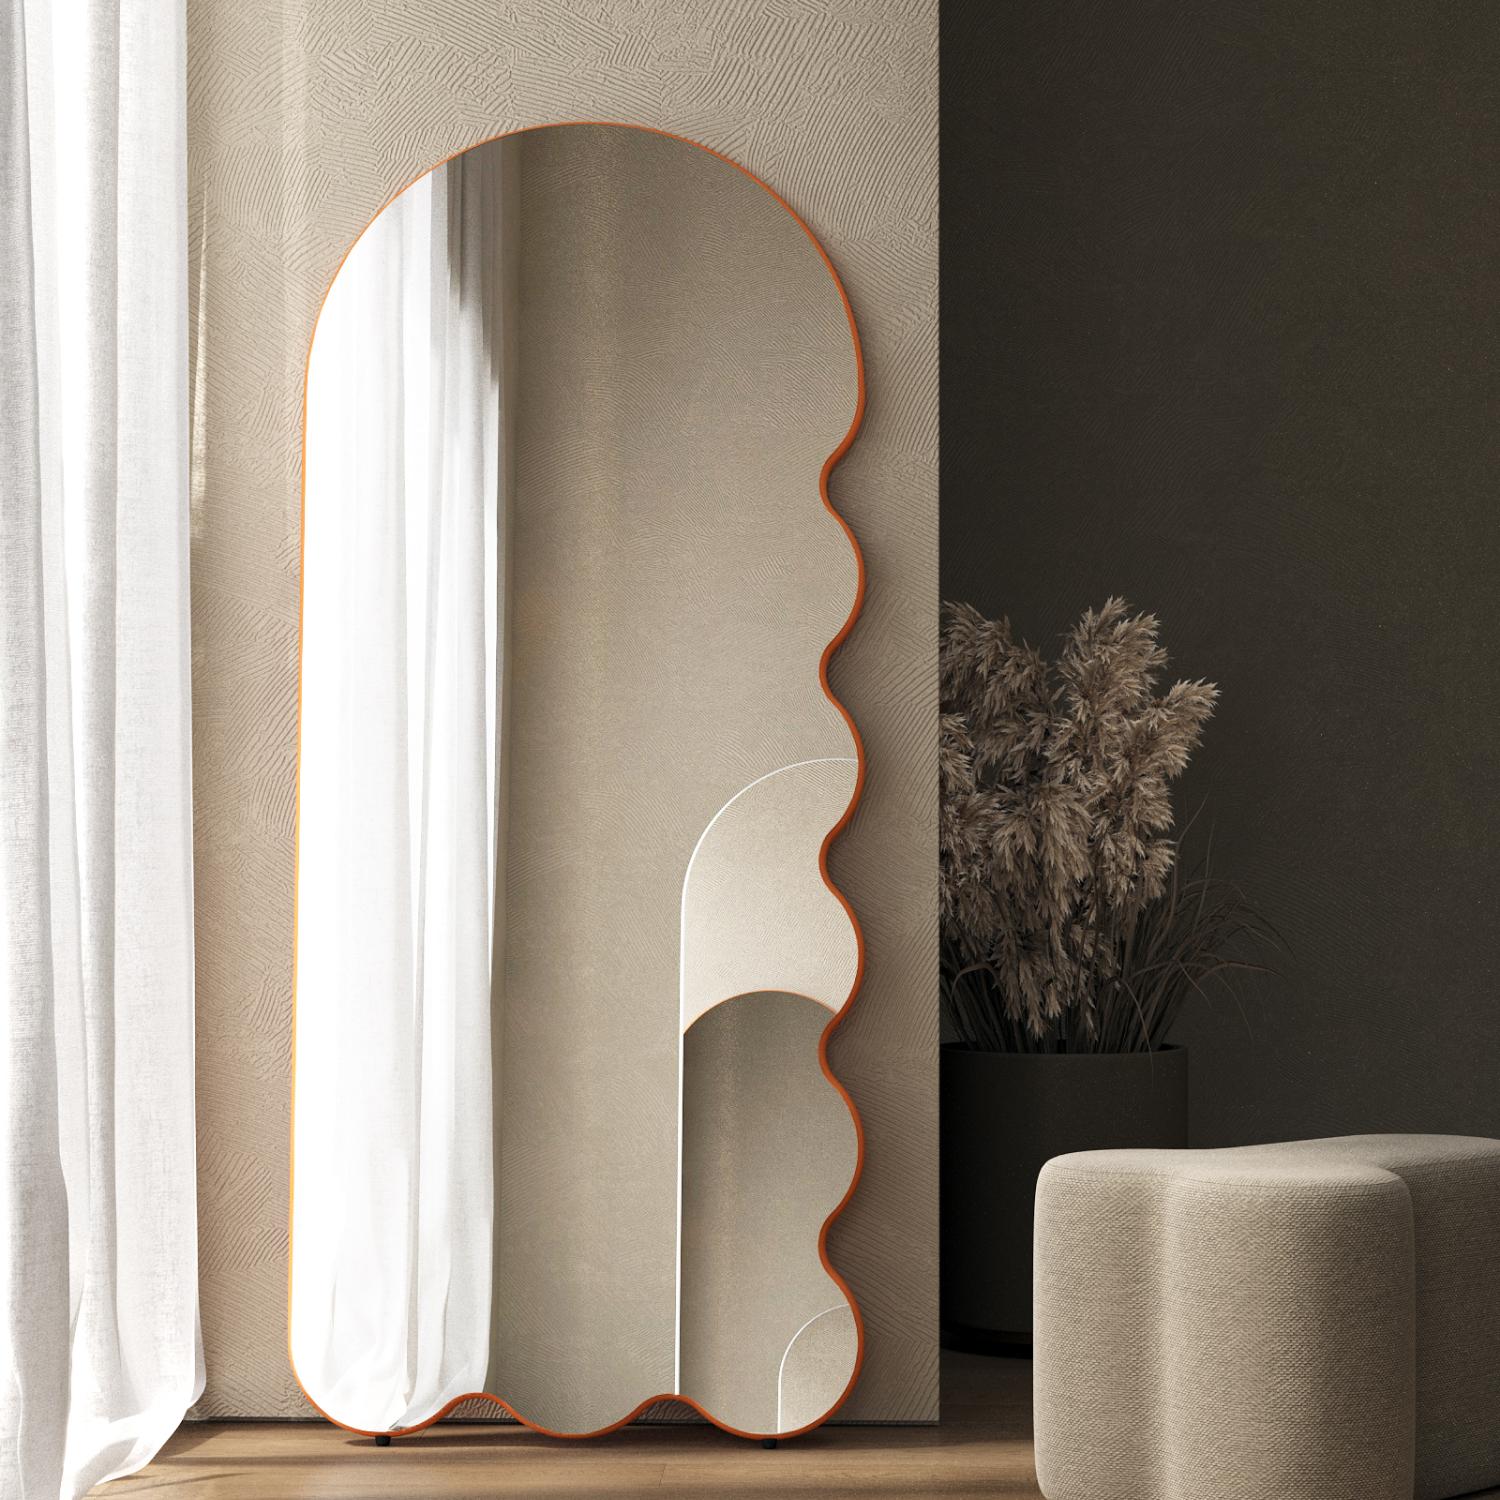 Contemporary Mirror 'Archvyli R8' by Oitoproducts.

Dimensions:
W 78 cm x H 180 cm x D 4 cm
W 37 in x H 71 in x D 1.3 in

Materials: Painted ecological water paint MDF, silver glass mirror, special rubber feet.

About
A full-length art mirror that